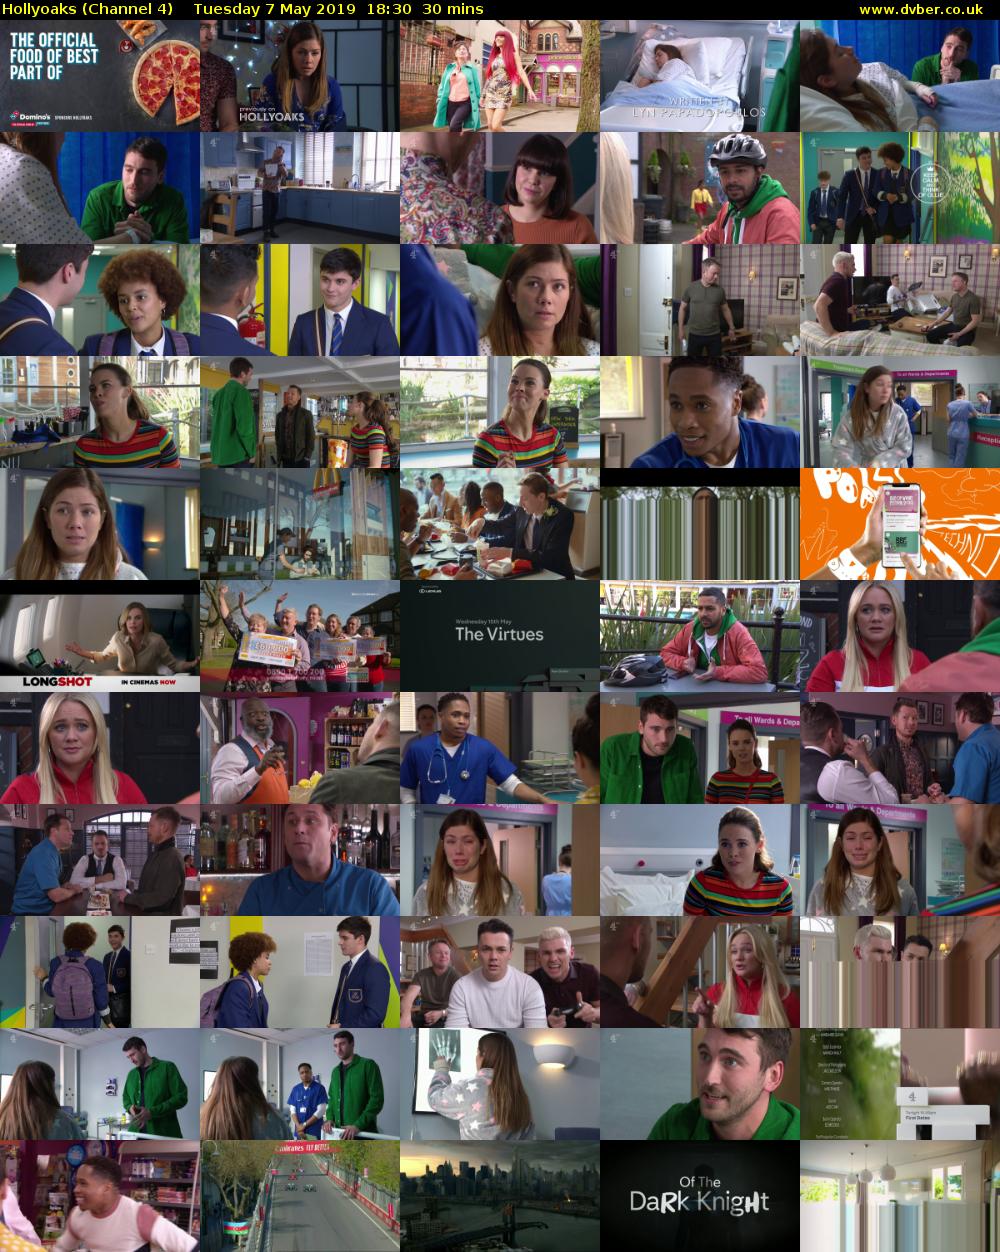 Hollyoaks (Channel 4) Tuesday 7 May 2019 18:30 - 19:00